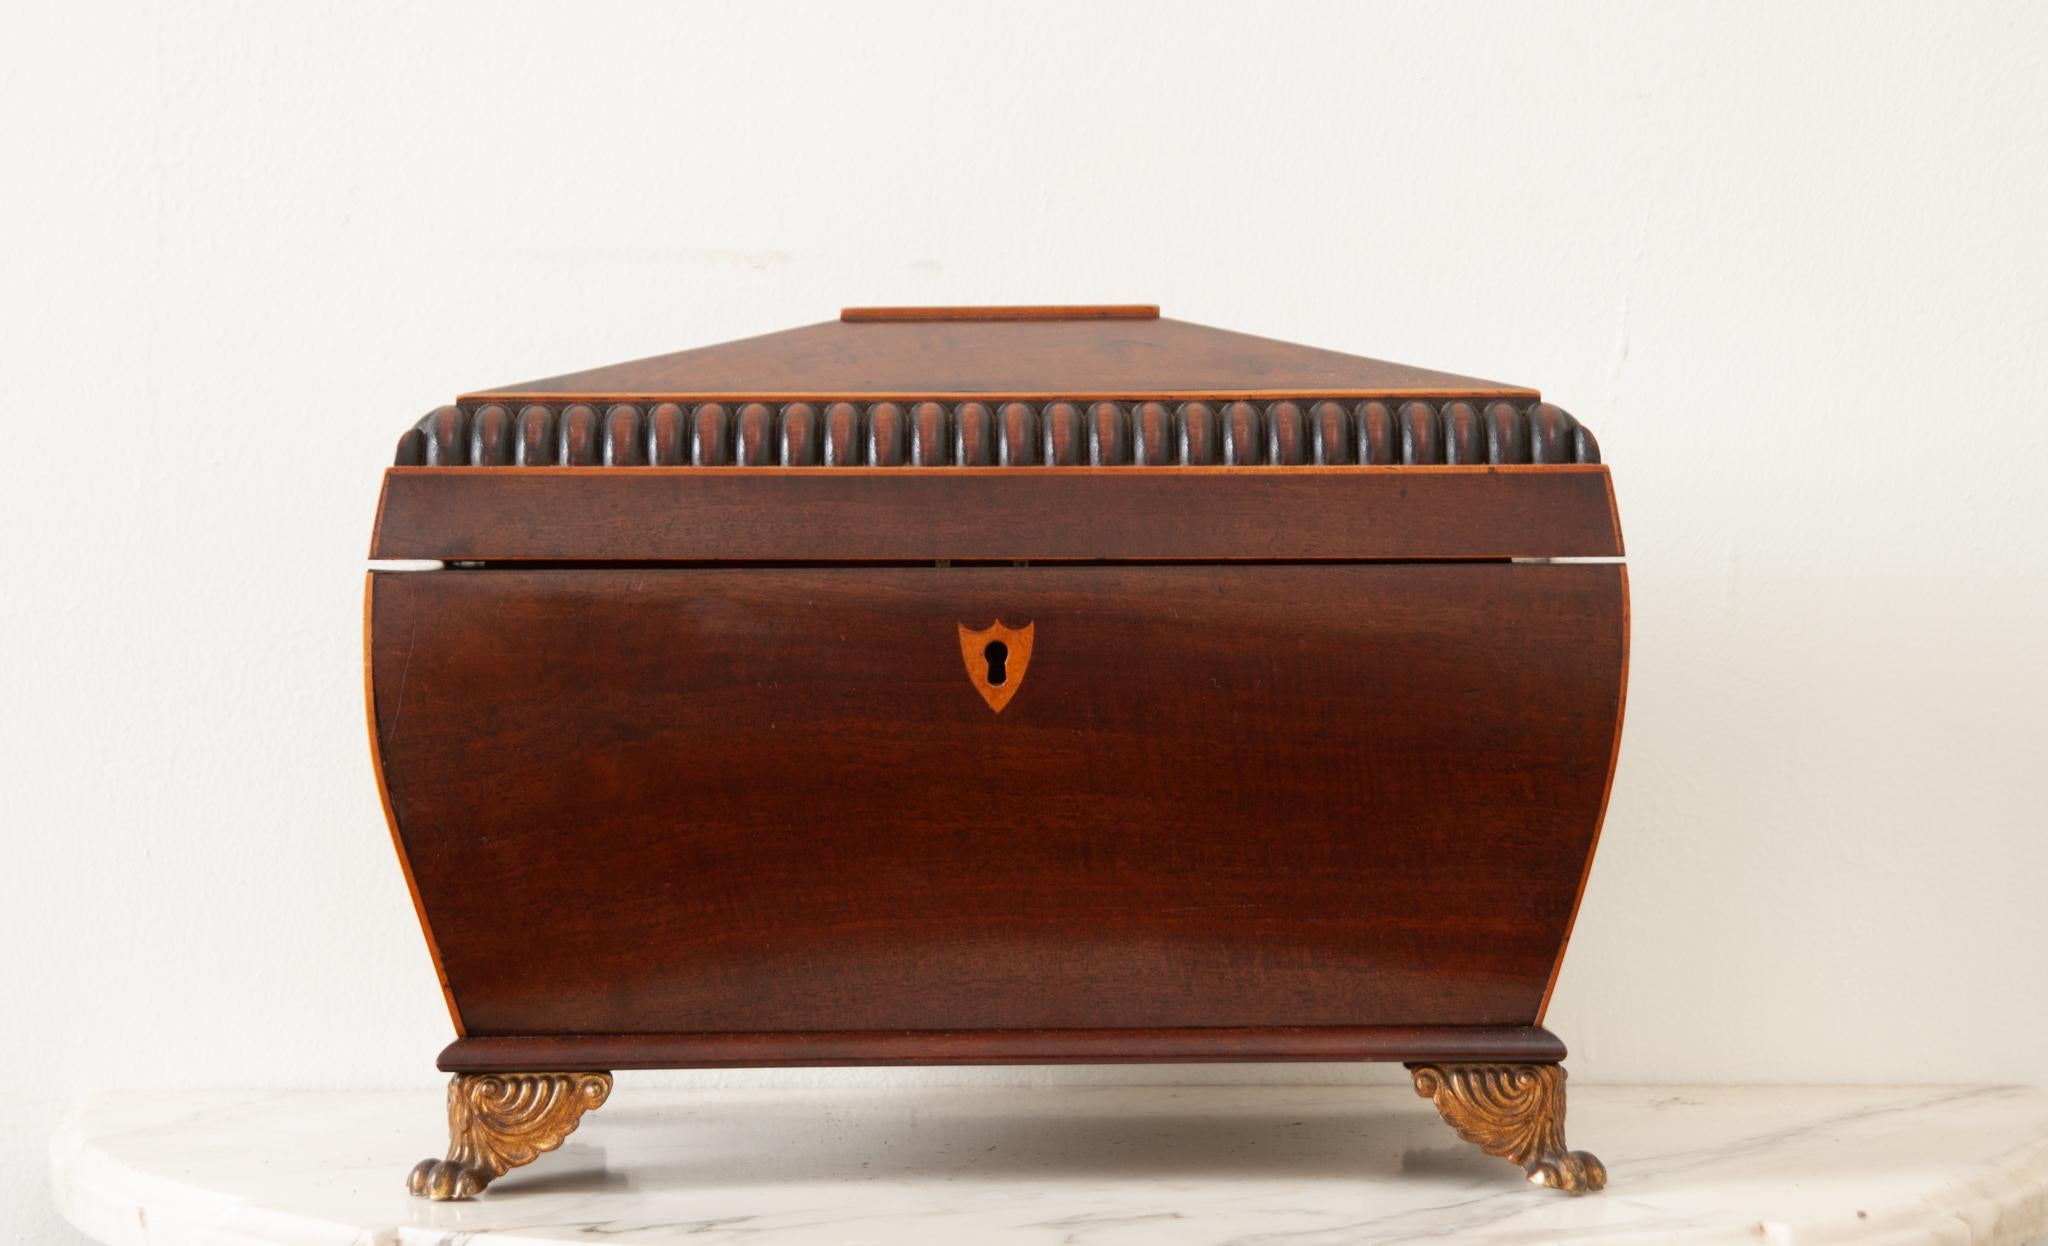 An English 19th Century top quality, solid mahogany tea caddy. This shaped box has a carved angular top lined with satinwood opening to a fitted interior. There are two removable fitted compartments with sliding tops once used for storing loose leaf